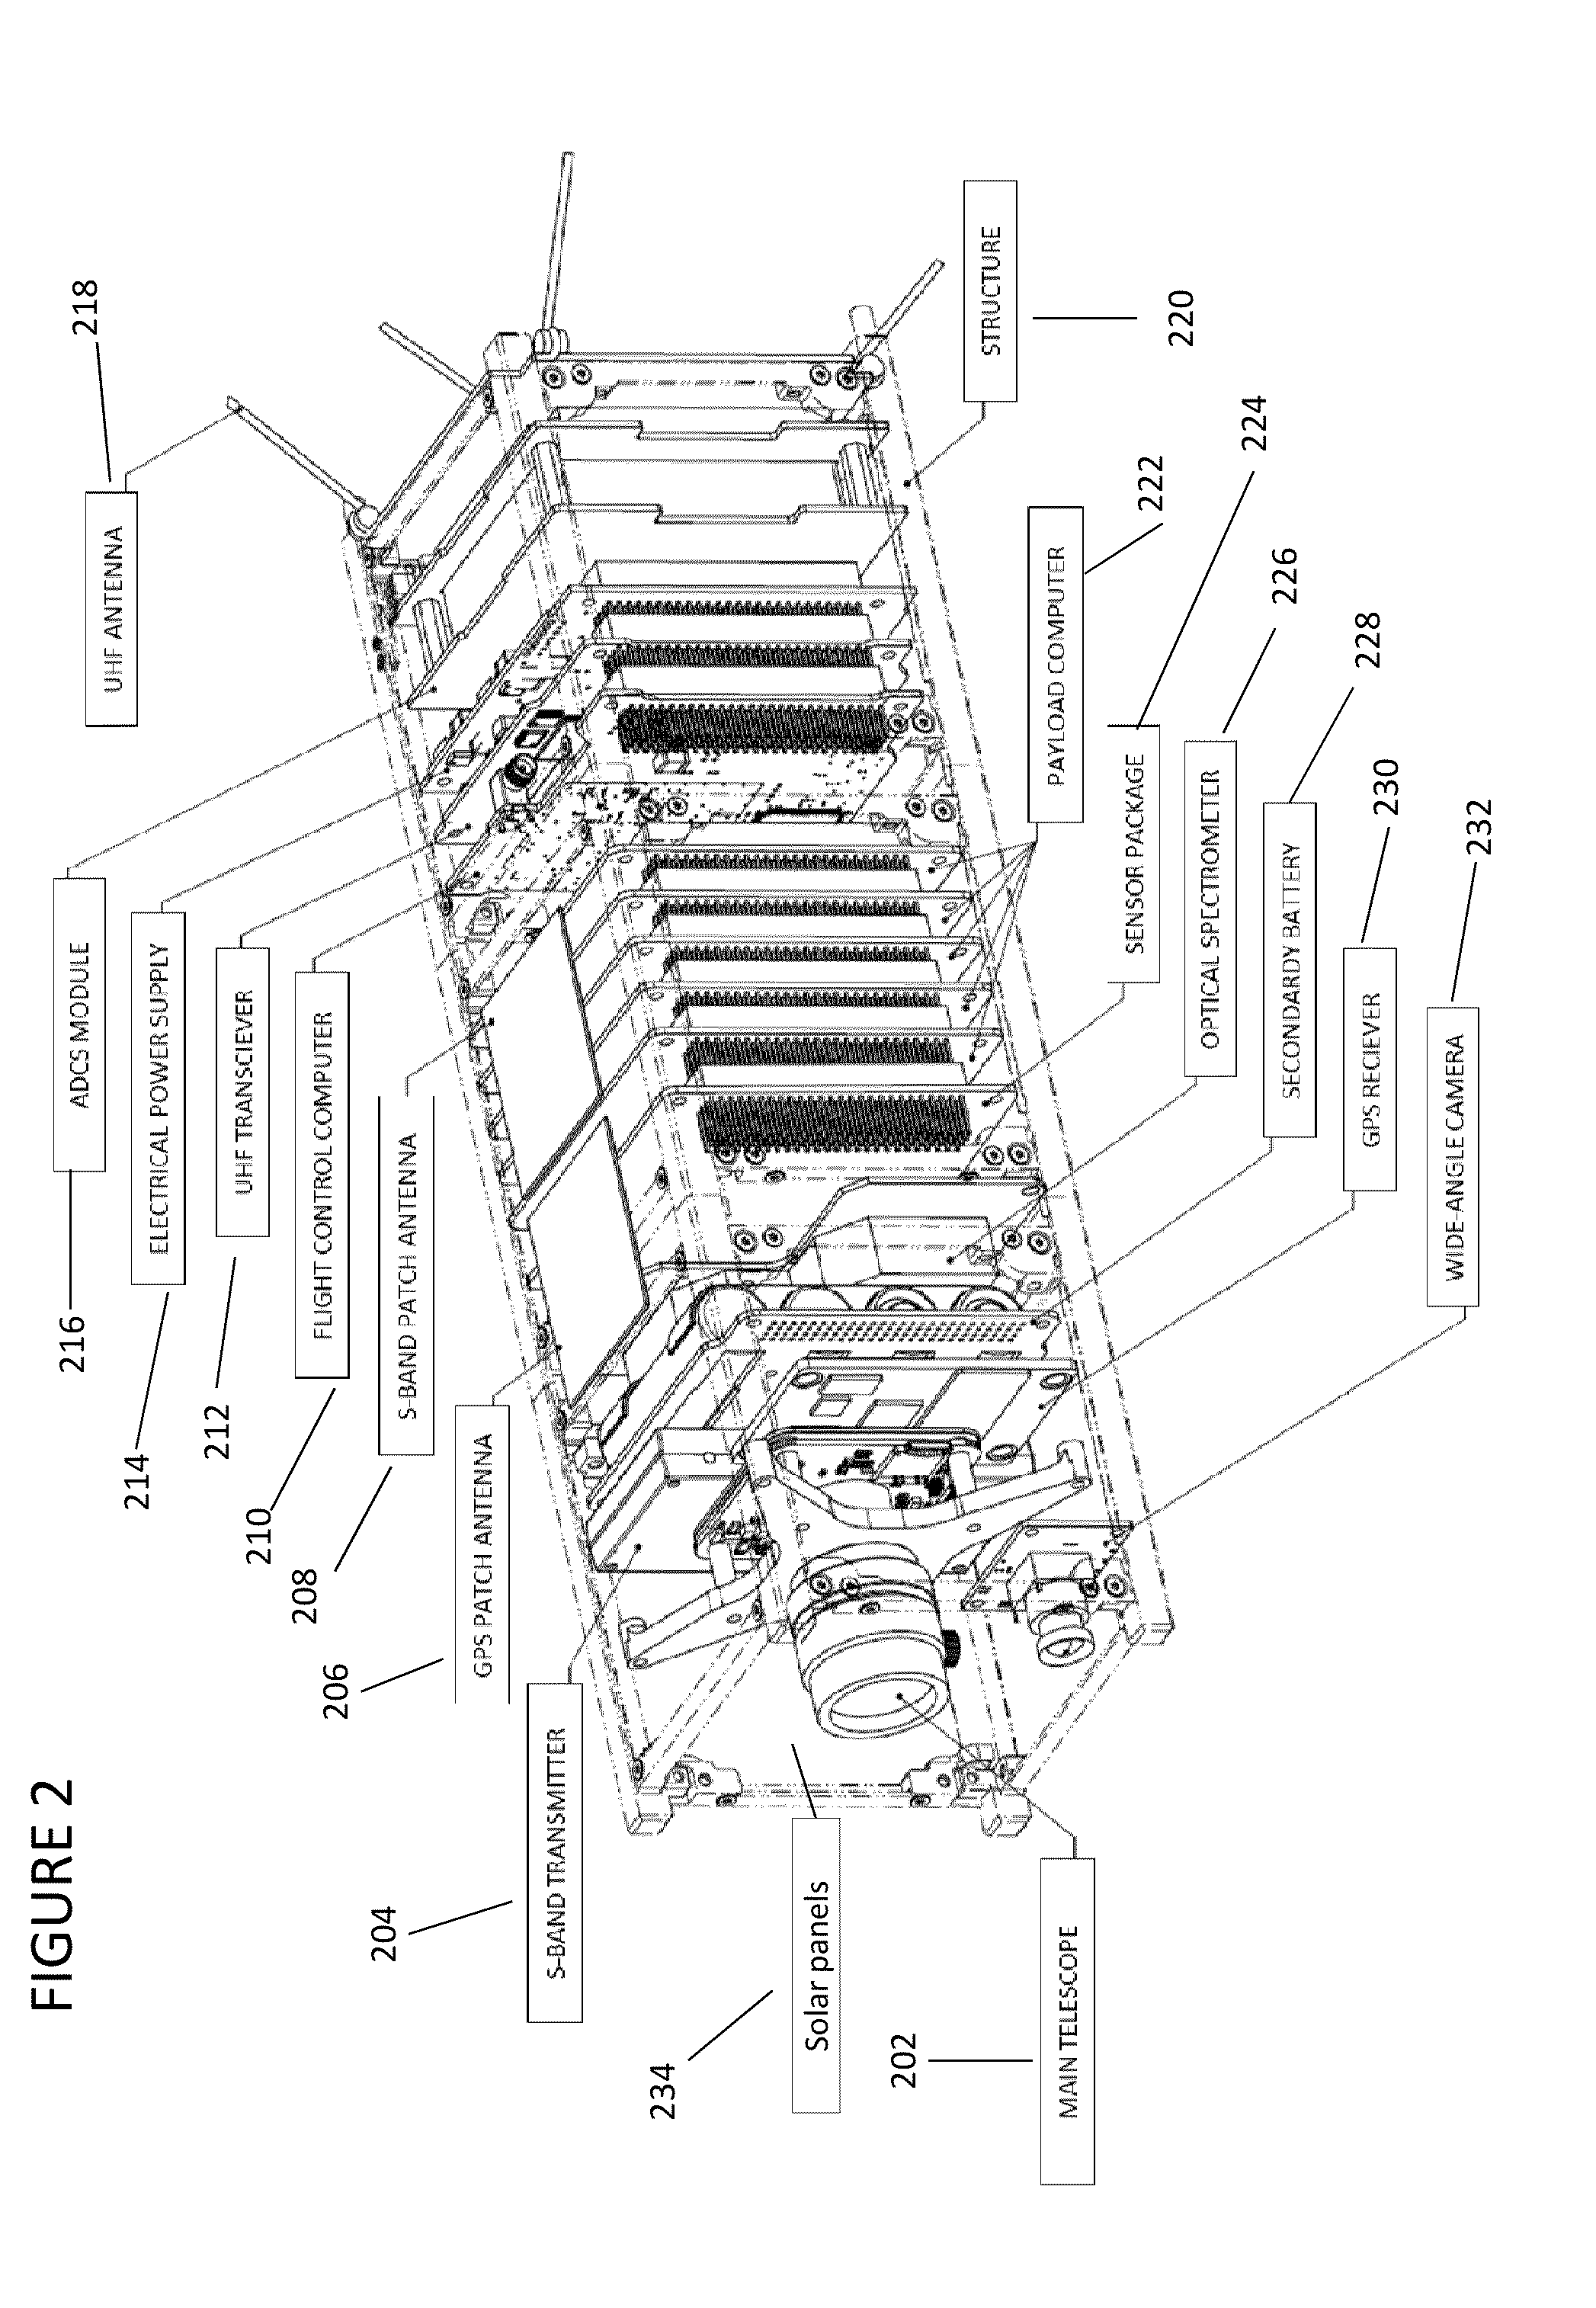 System and method for widespread low cost orbital satellite access